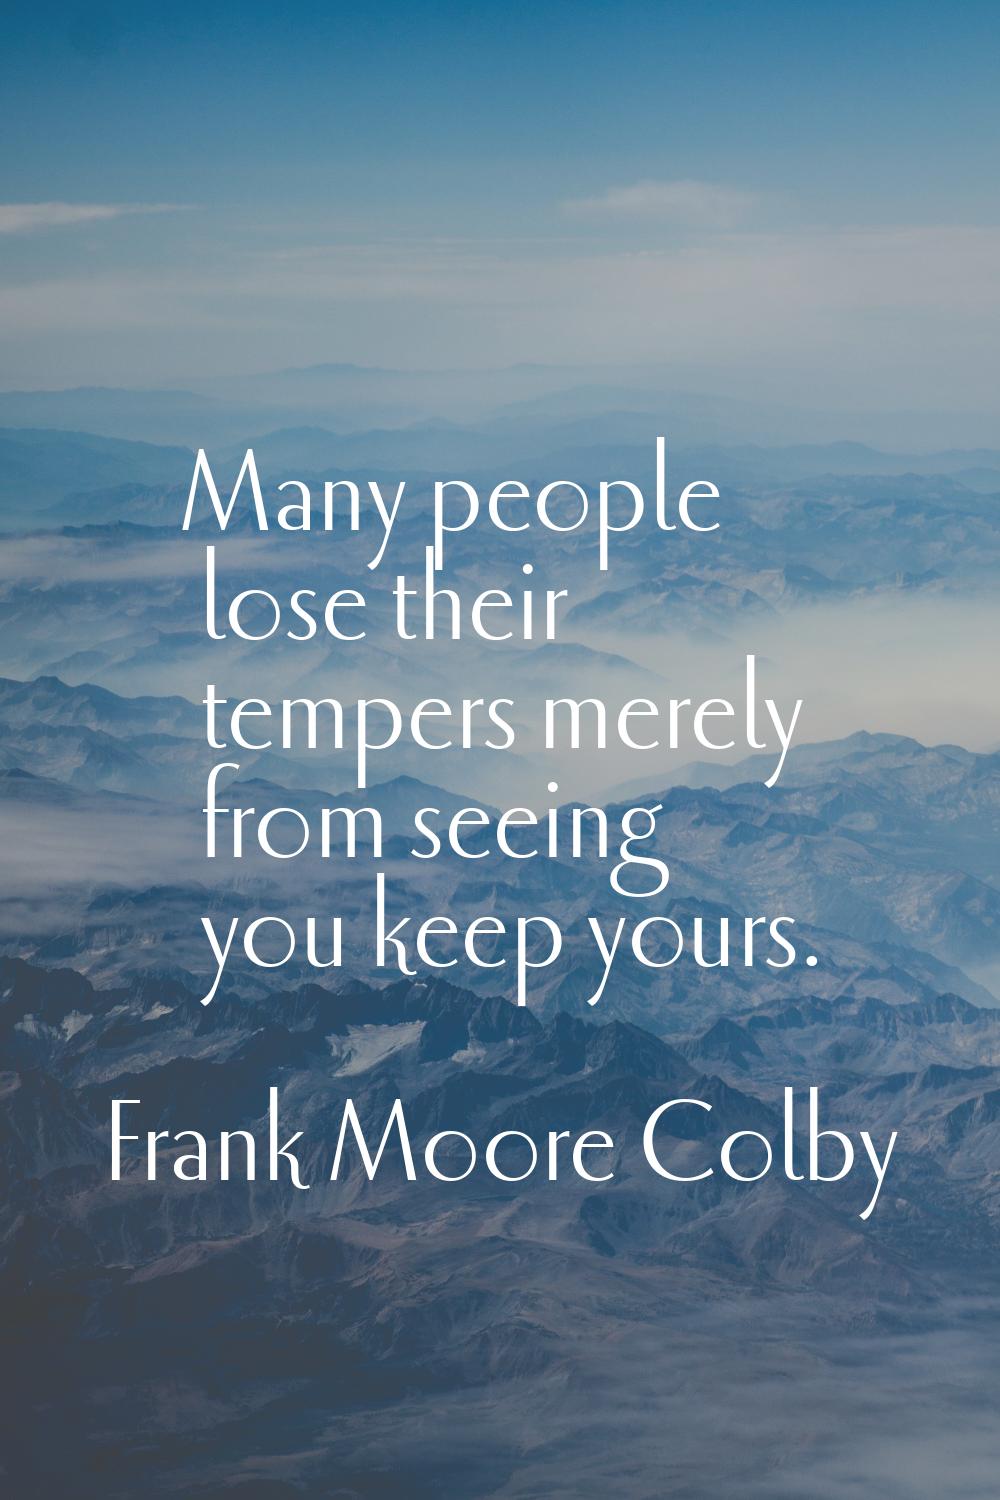 Many people lose their tempers merely from seeing you keep yours.